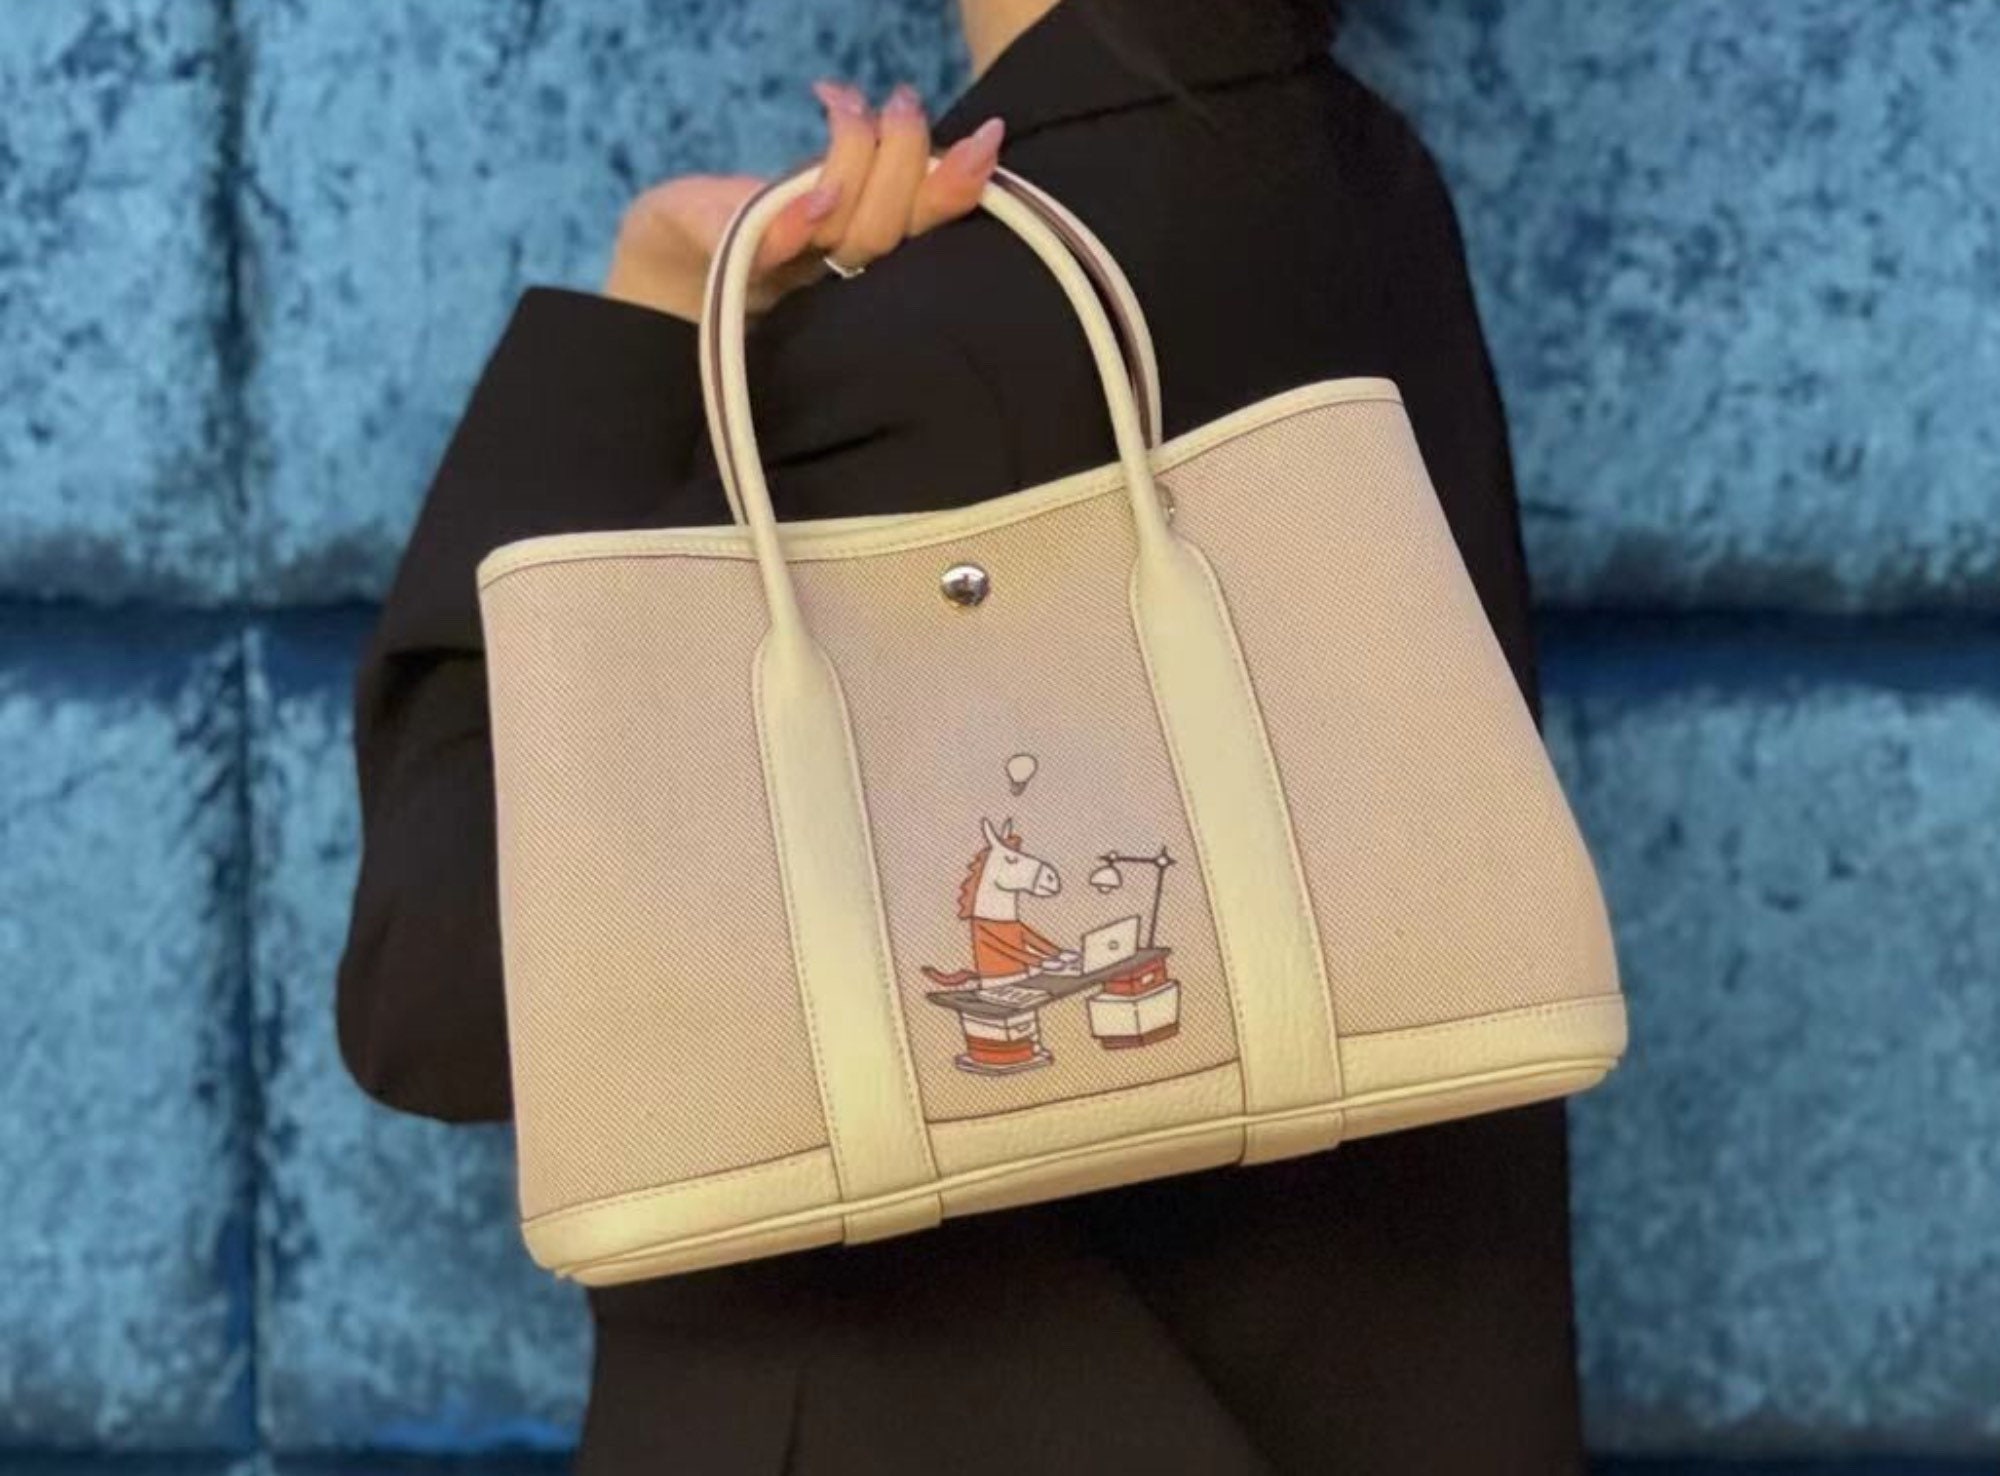 Hermes Canvas Tote -  New Zealand